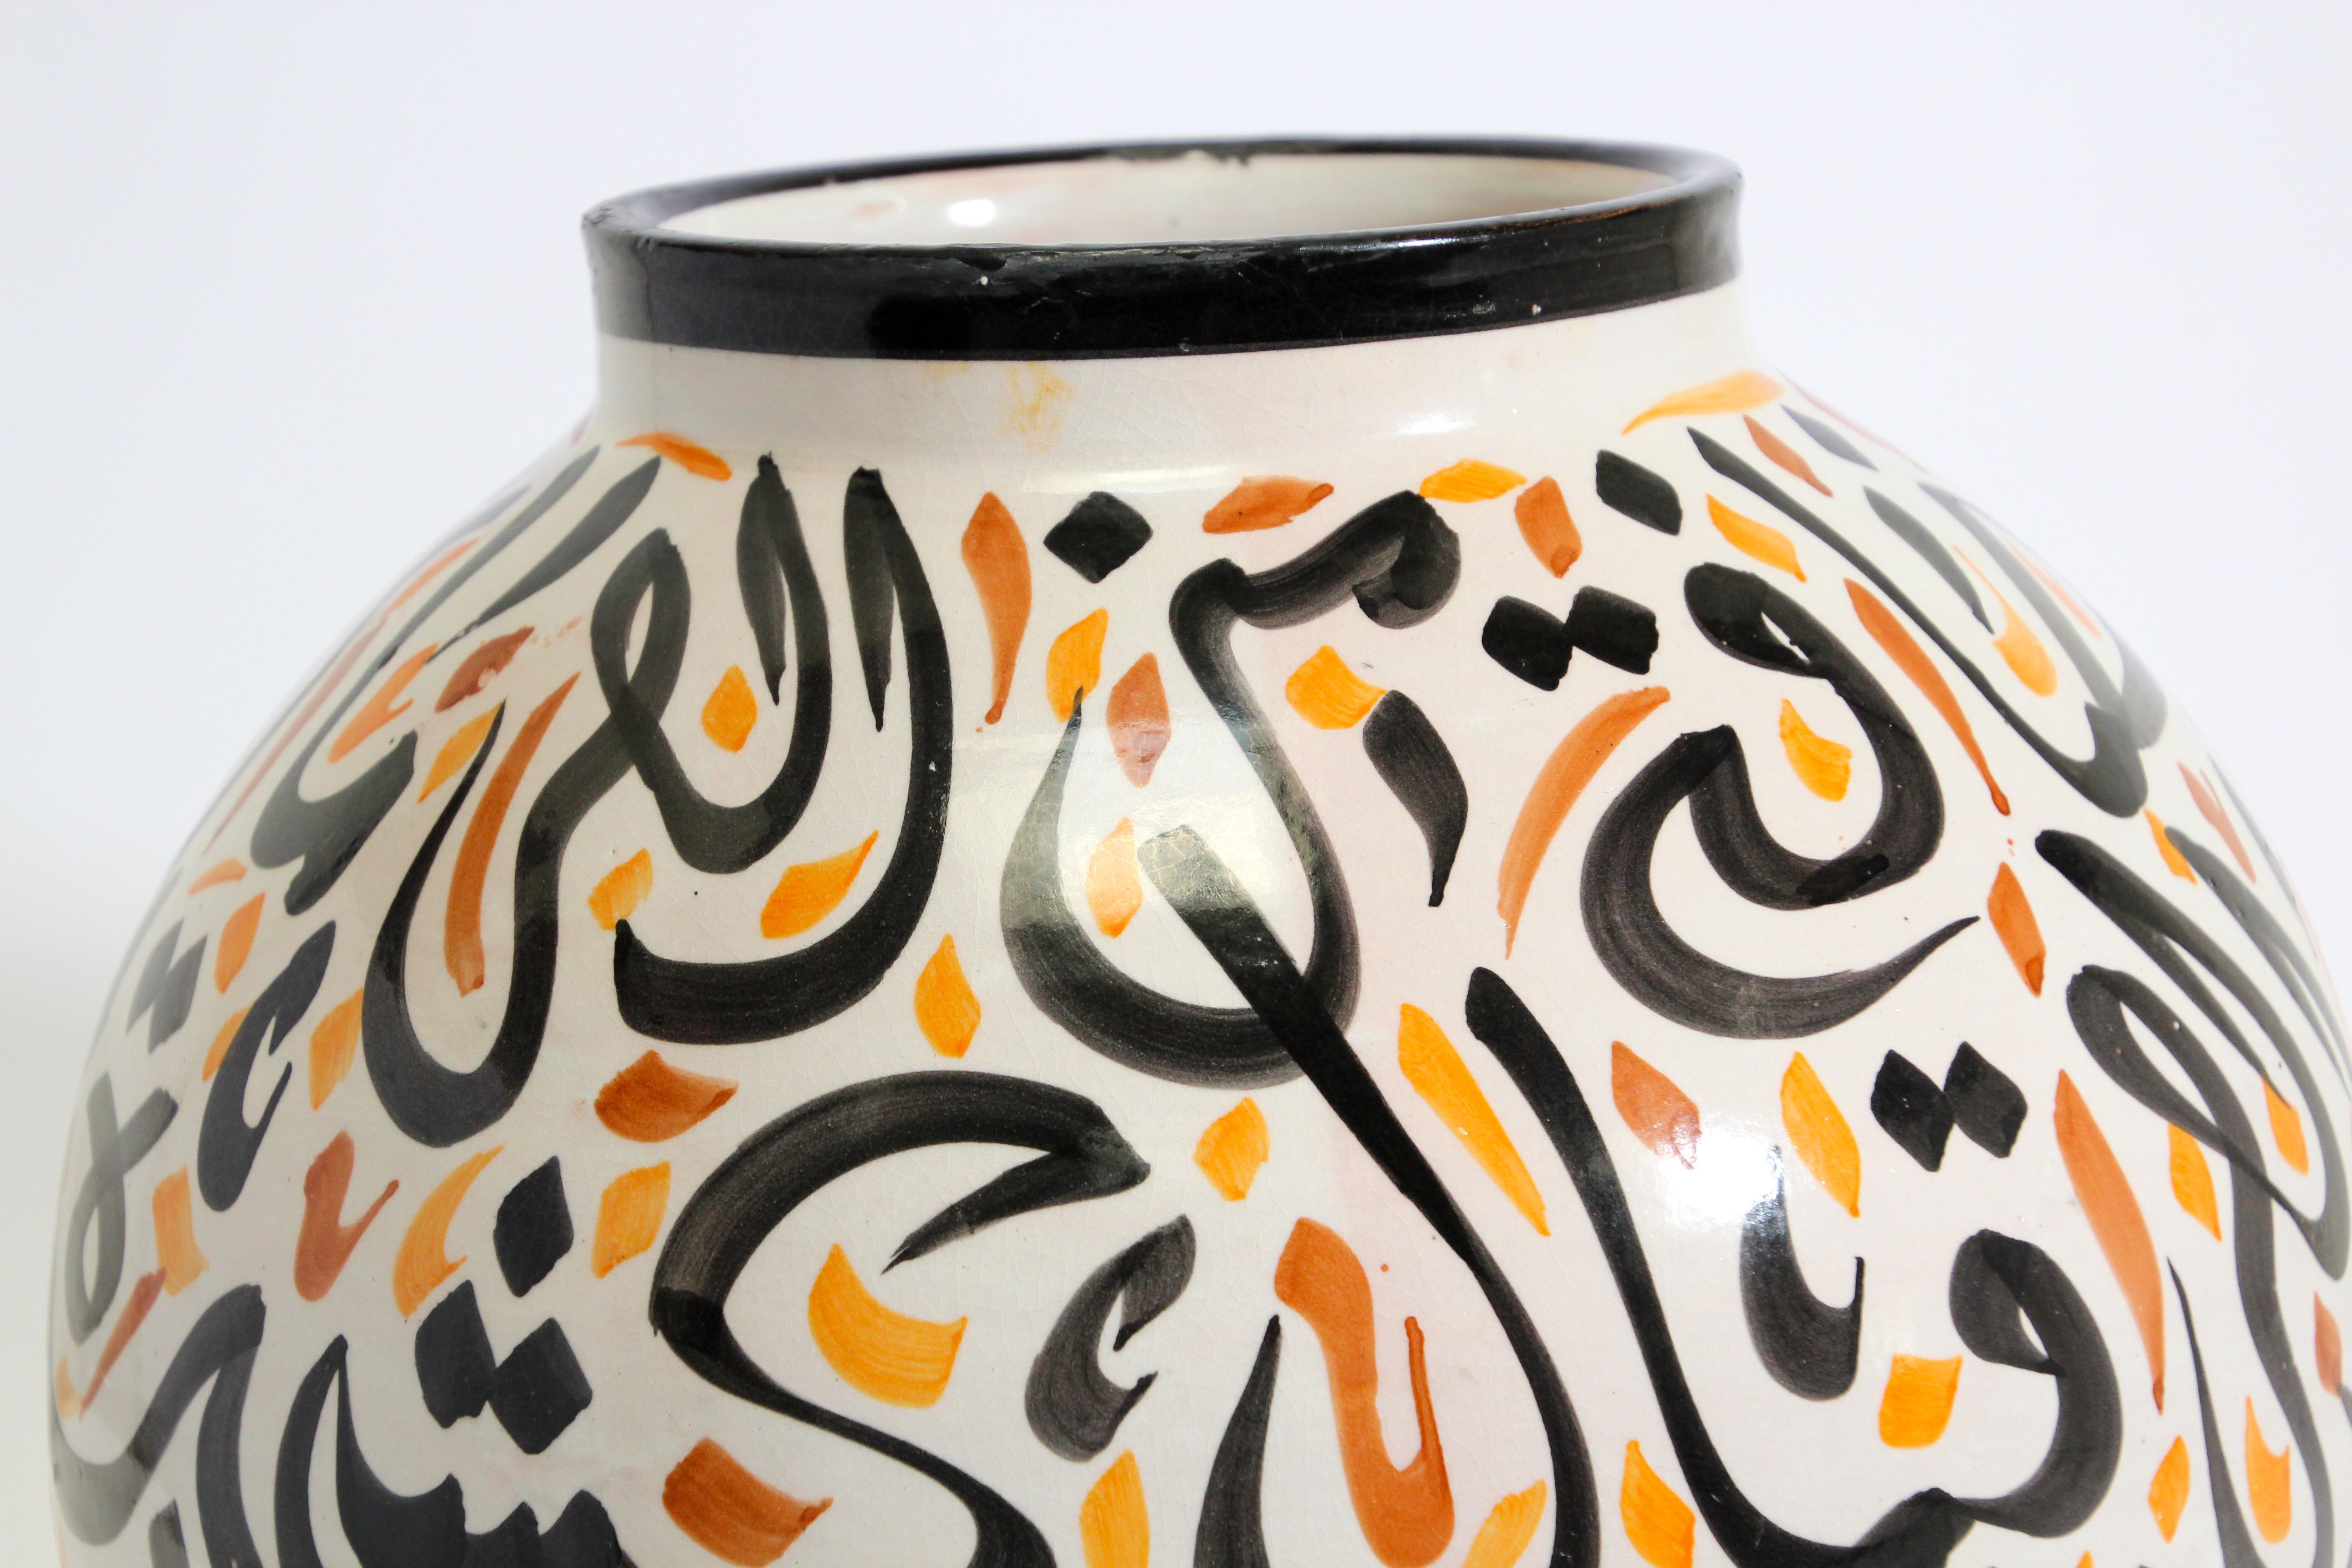 Moroccan Ceramic Lidded Urn with Arabic Calligraphy Lettrism Writing For Sale 2